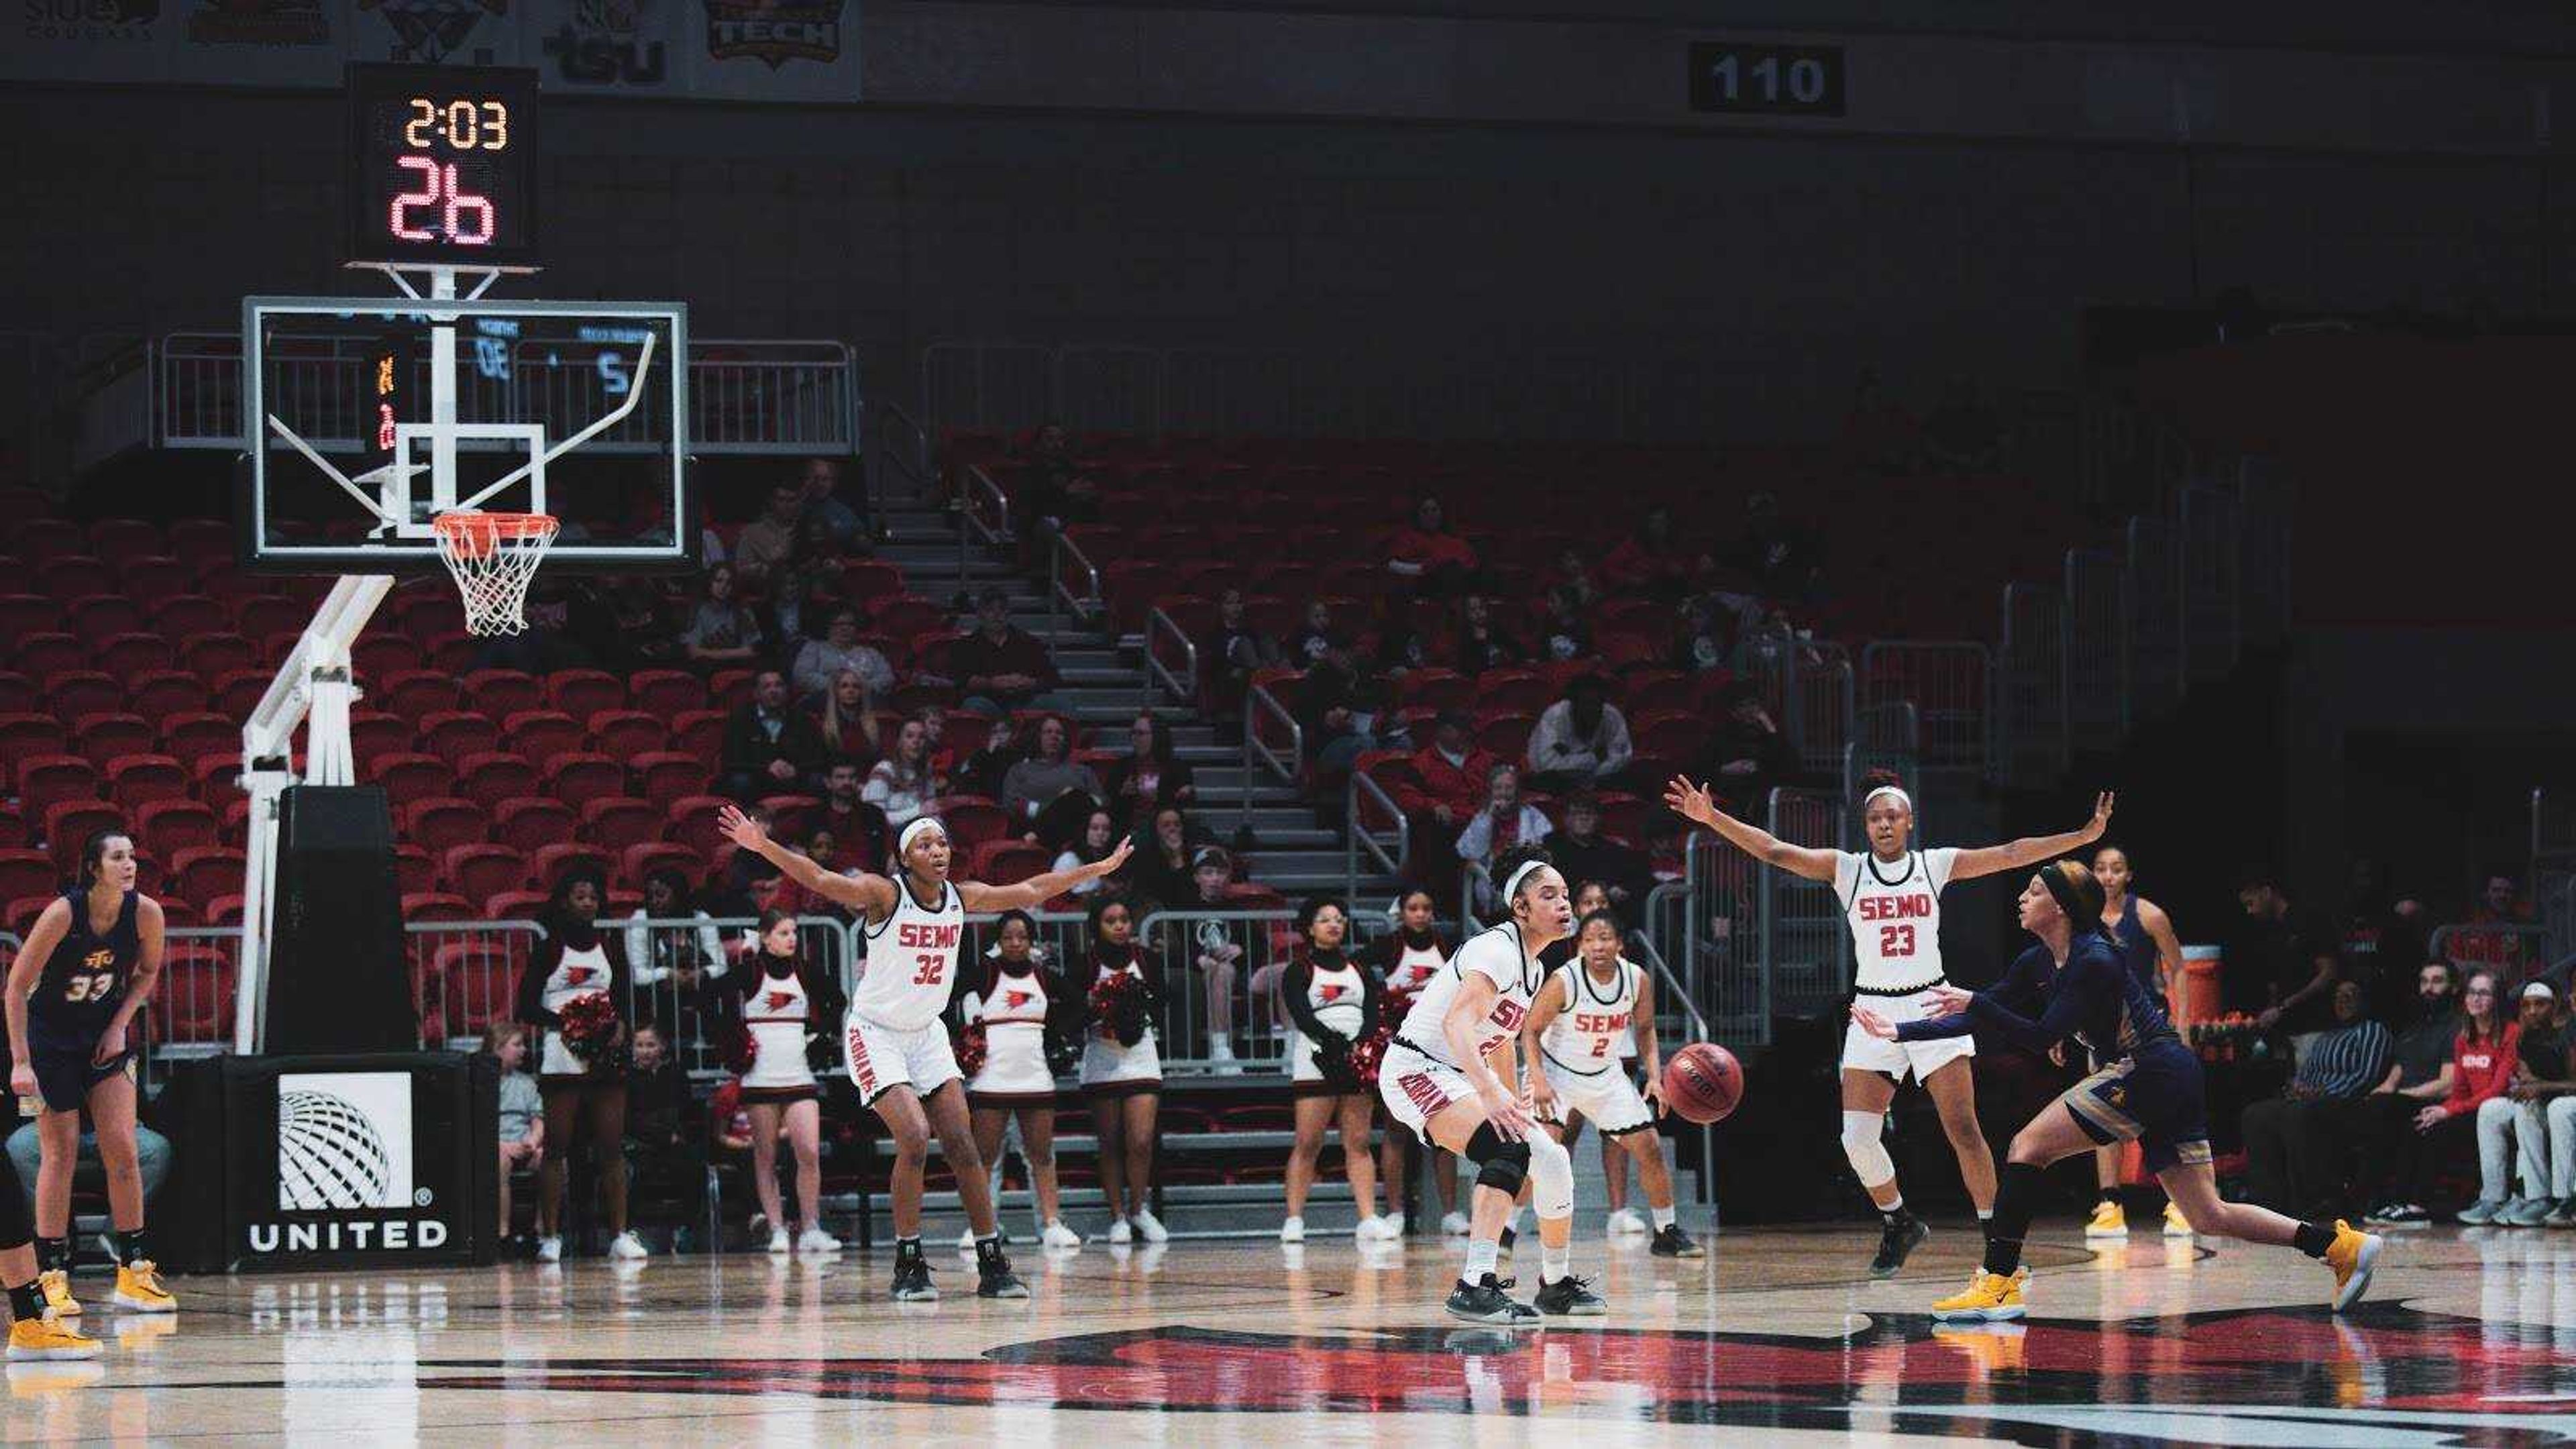 Junior guard Tesia Thompson and the Redhawks defense guard against the Tennessee Tech offense on Feb. 8 at the Show Me Center.